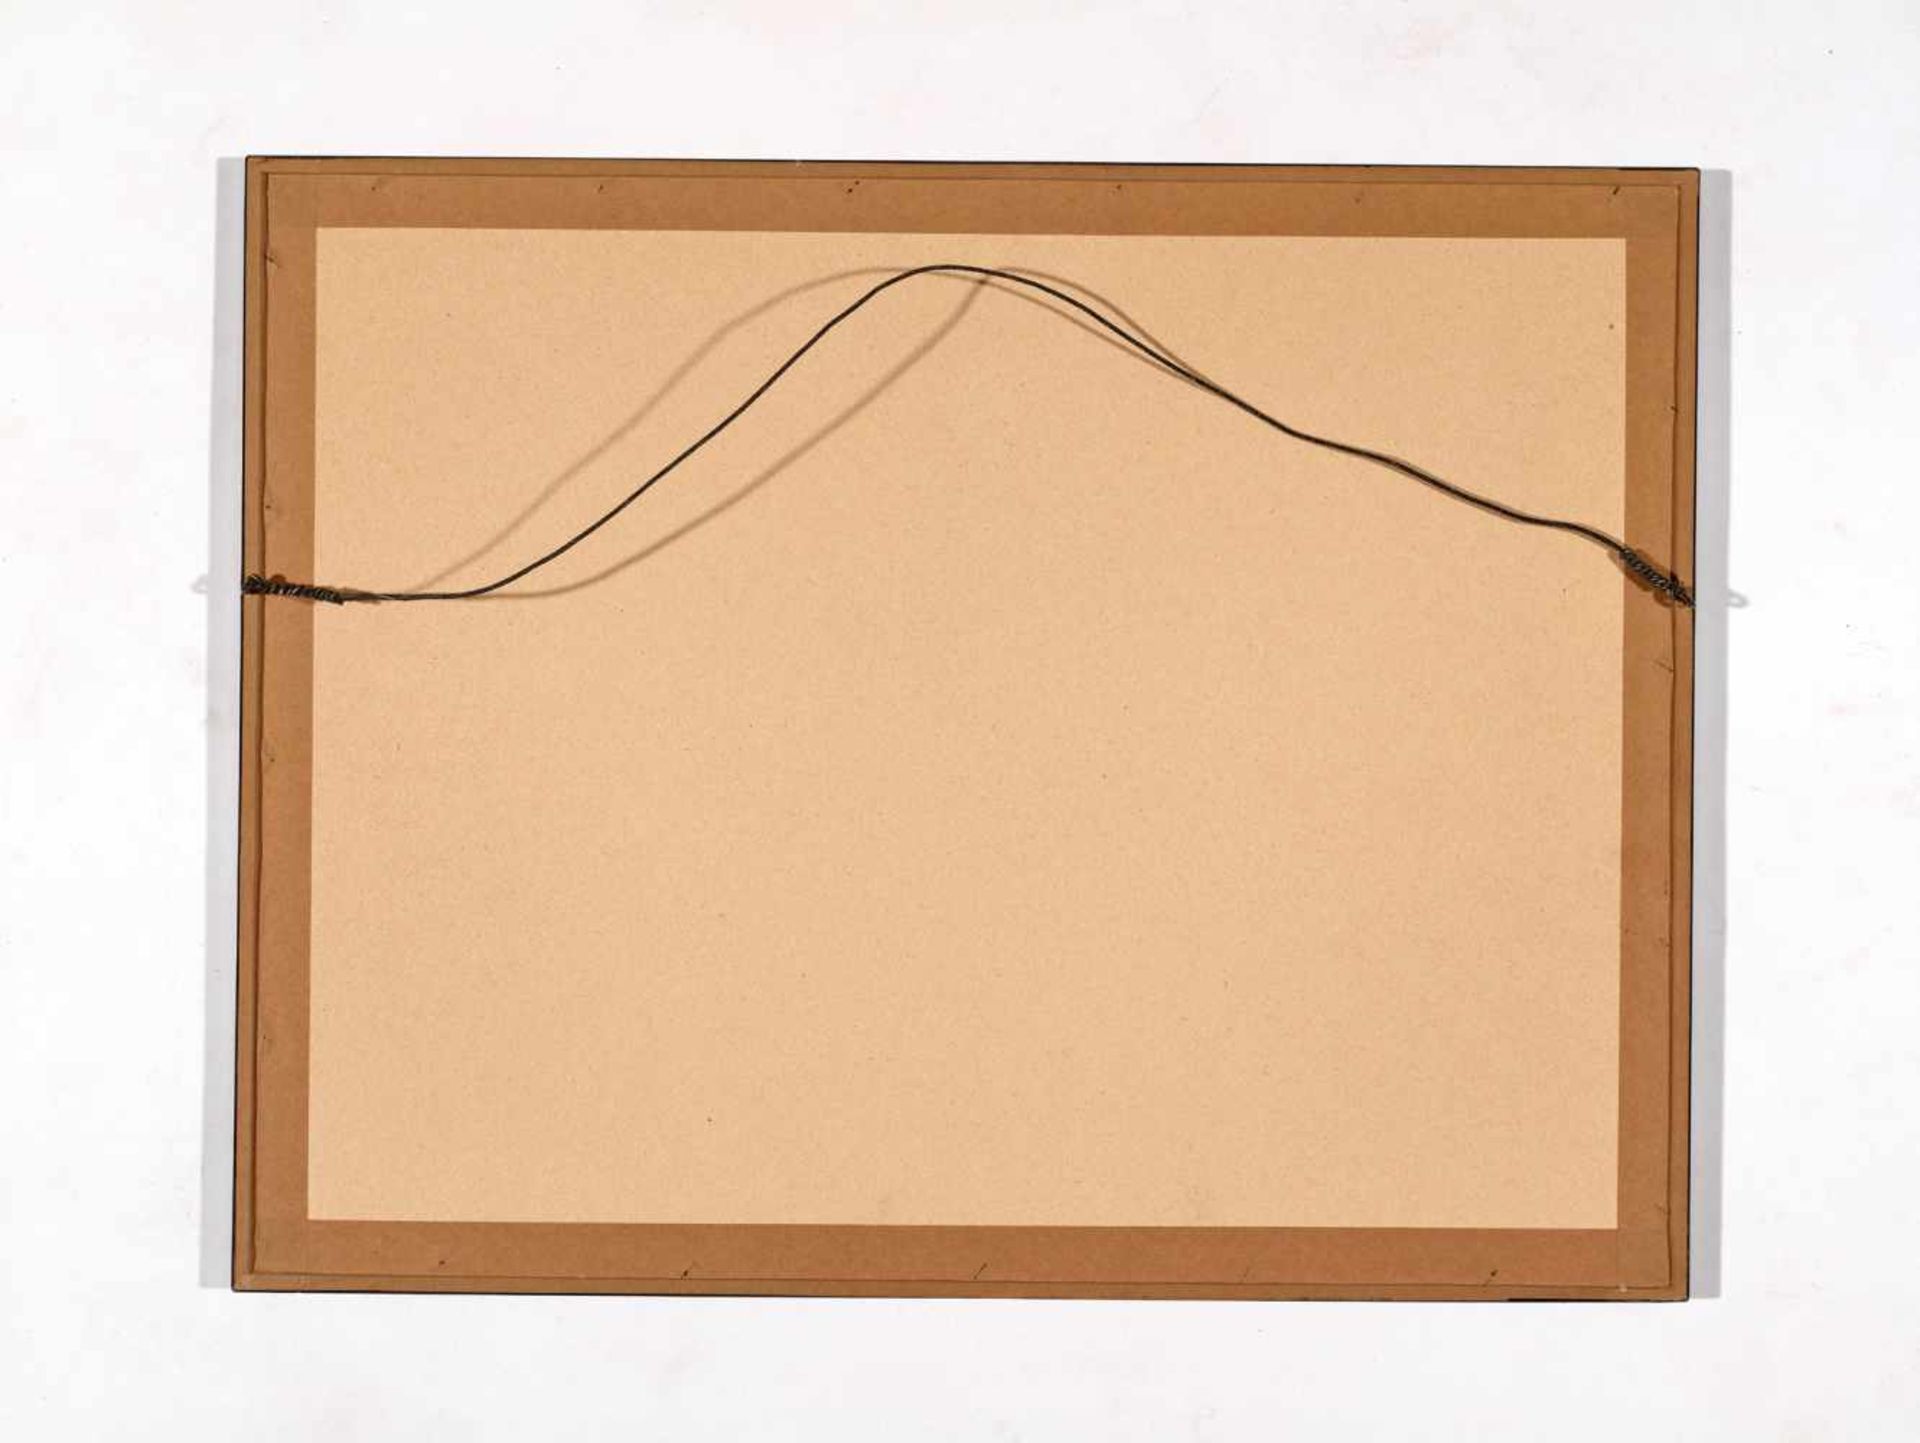 A ‘PAK CHOI, SHITAKE AND BAMBOO SHOOT’ PAINTING BY JING ZHI, 20th CENTURY Ink and color on paper, - Image 6 of 6